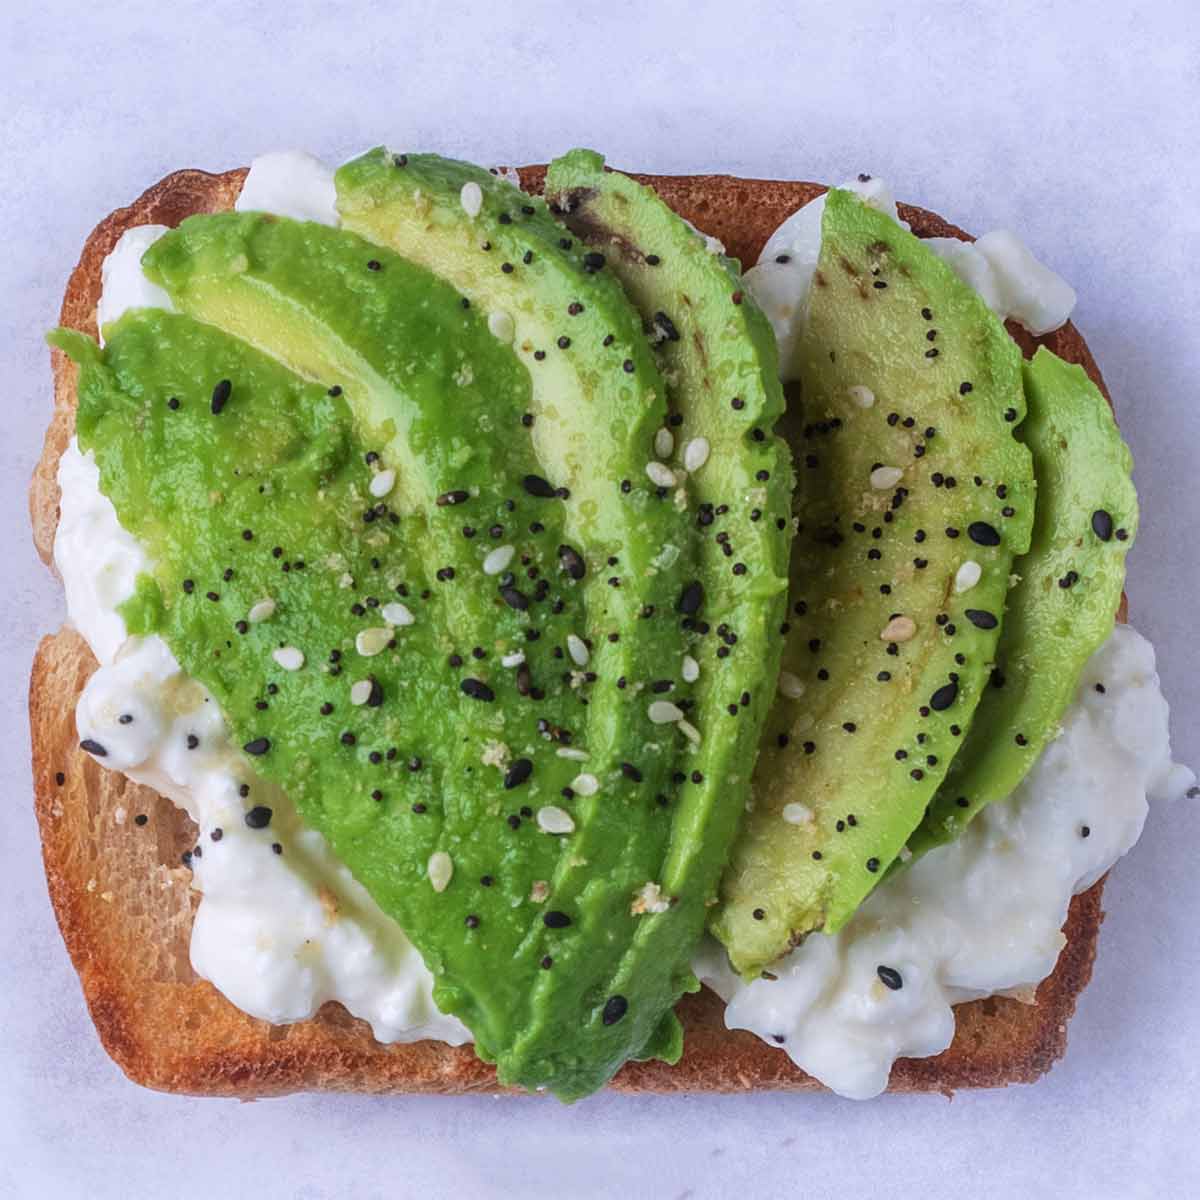 Slices of avocado and seasoning on top of cottage cheese on toast.